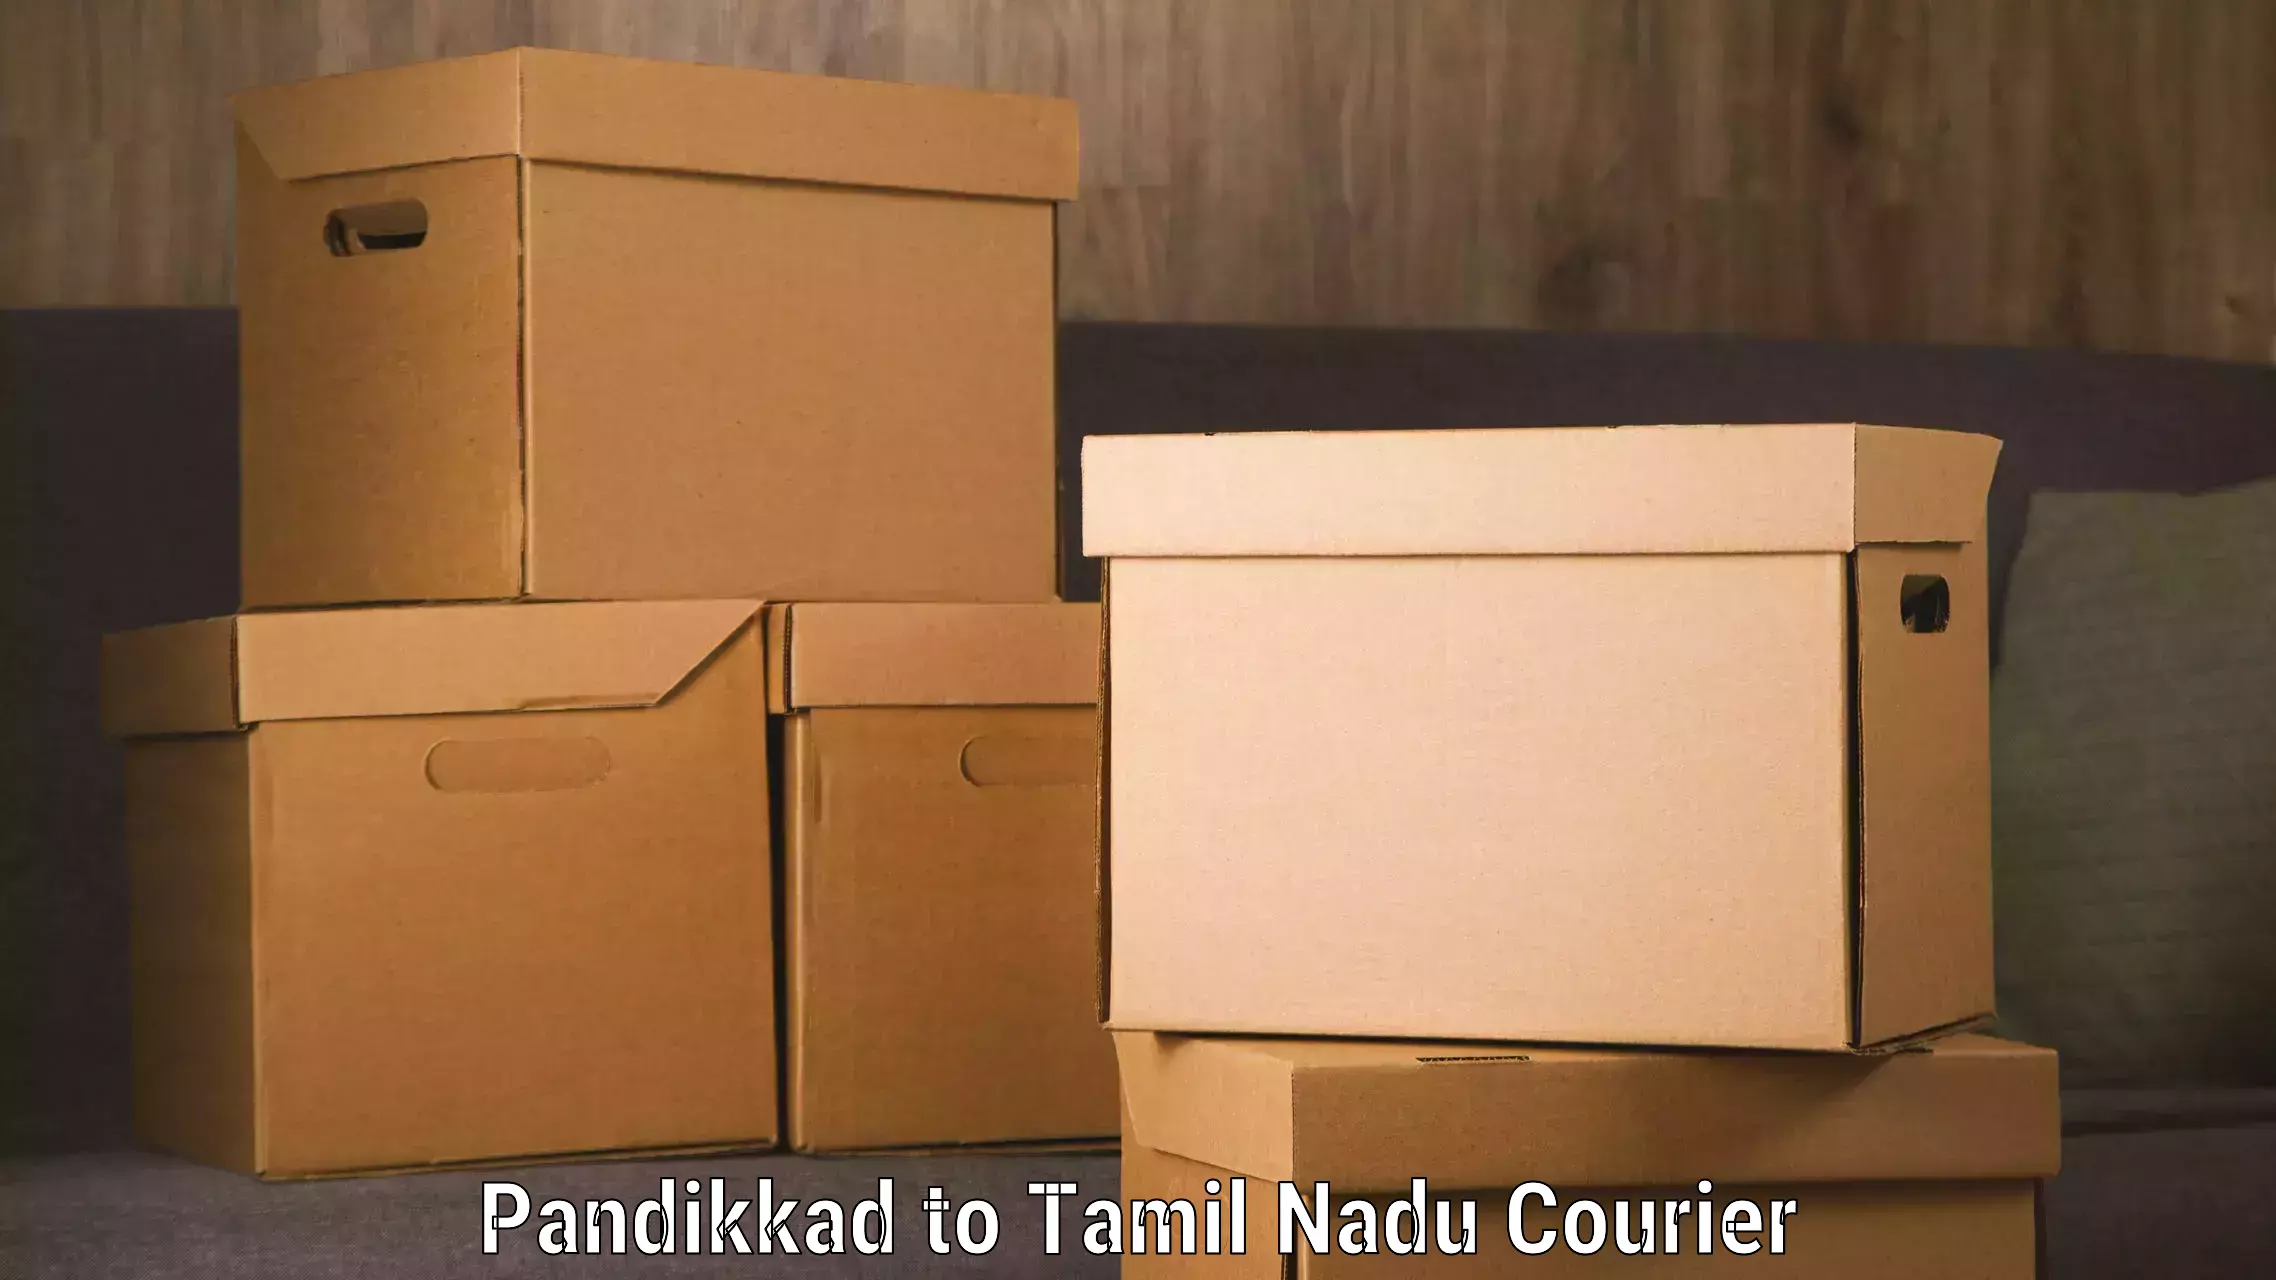 Express delivery solutions Pandikkad to Dindigul